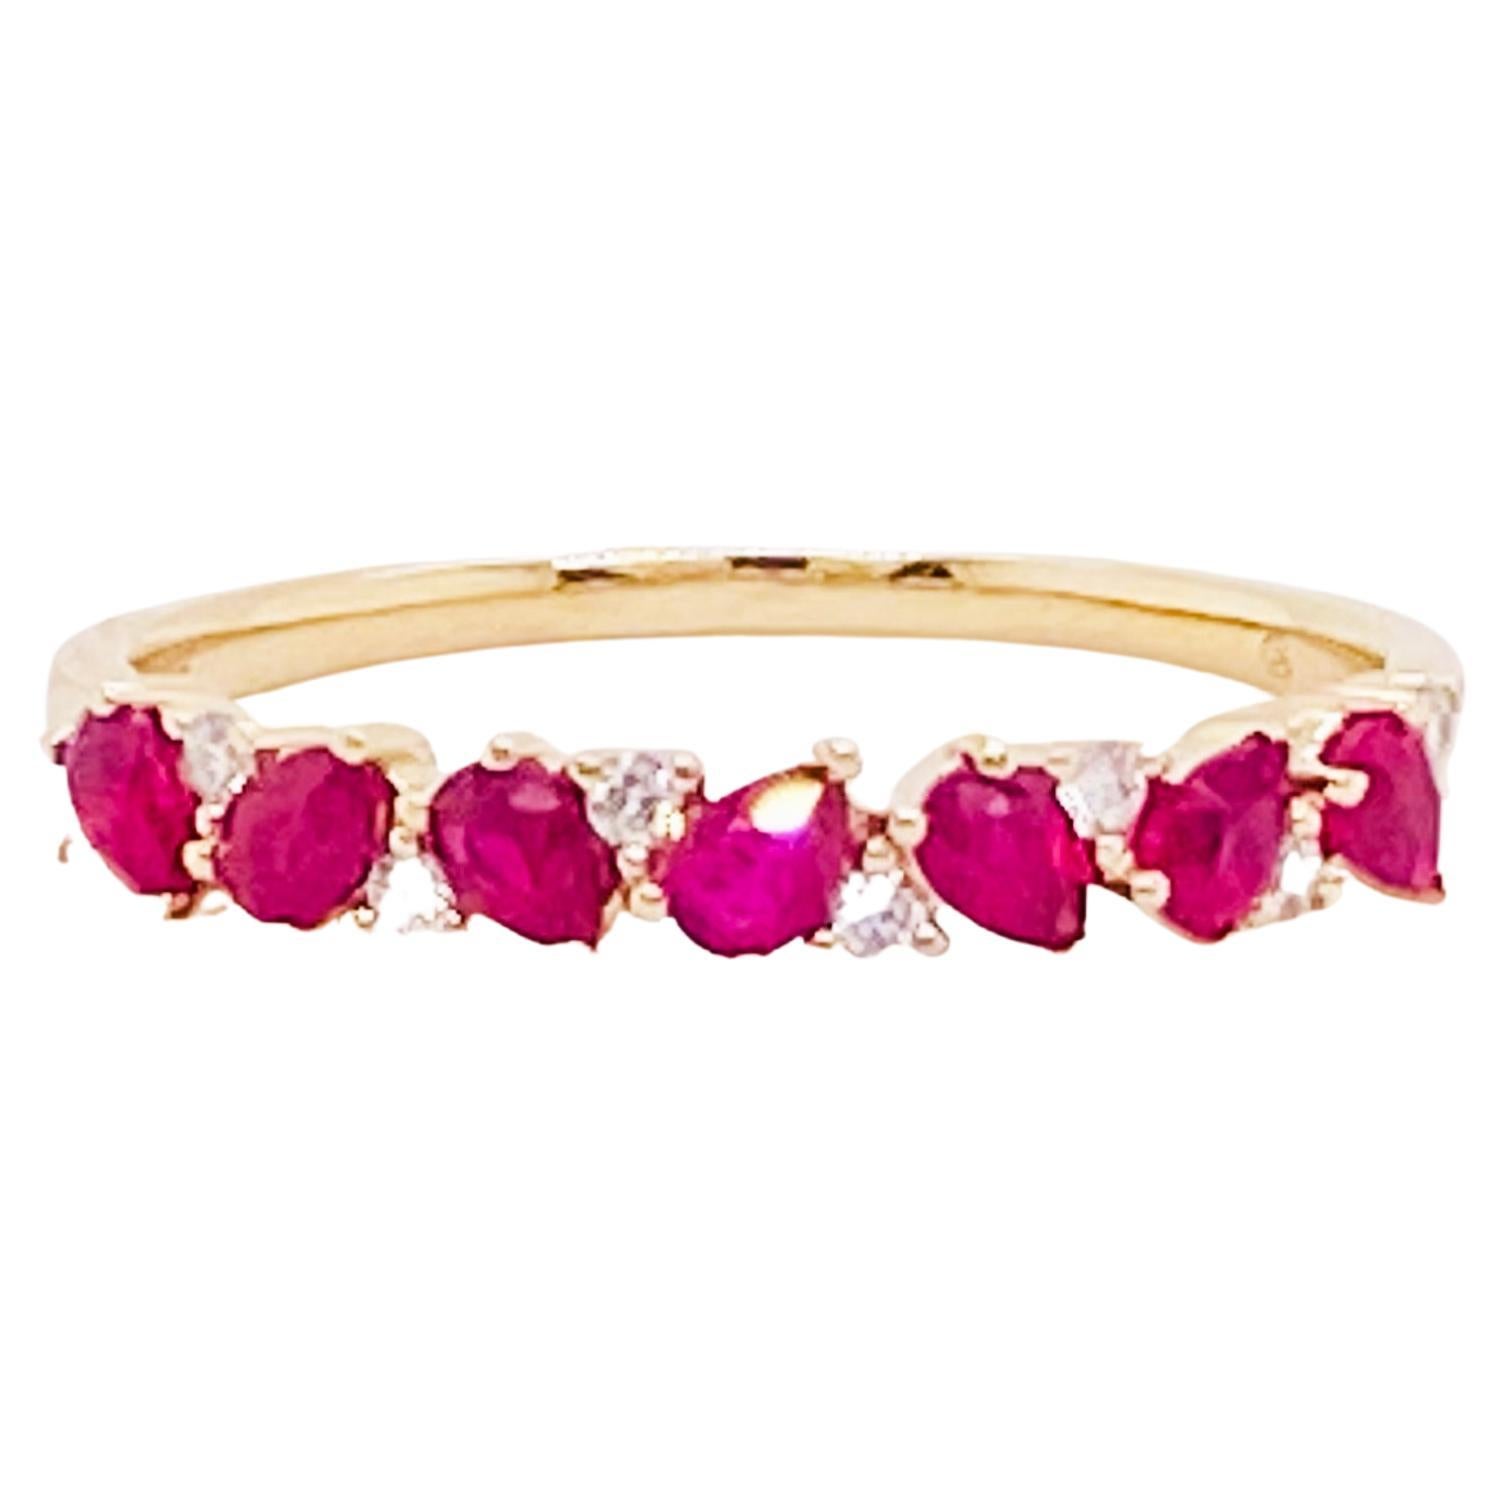 Ruby Diamond Band 14K Gold Pear Shape Ruby Interesting Stackable Band, Sizable